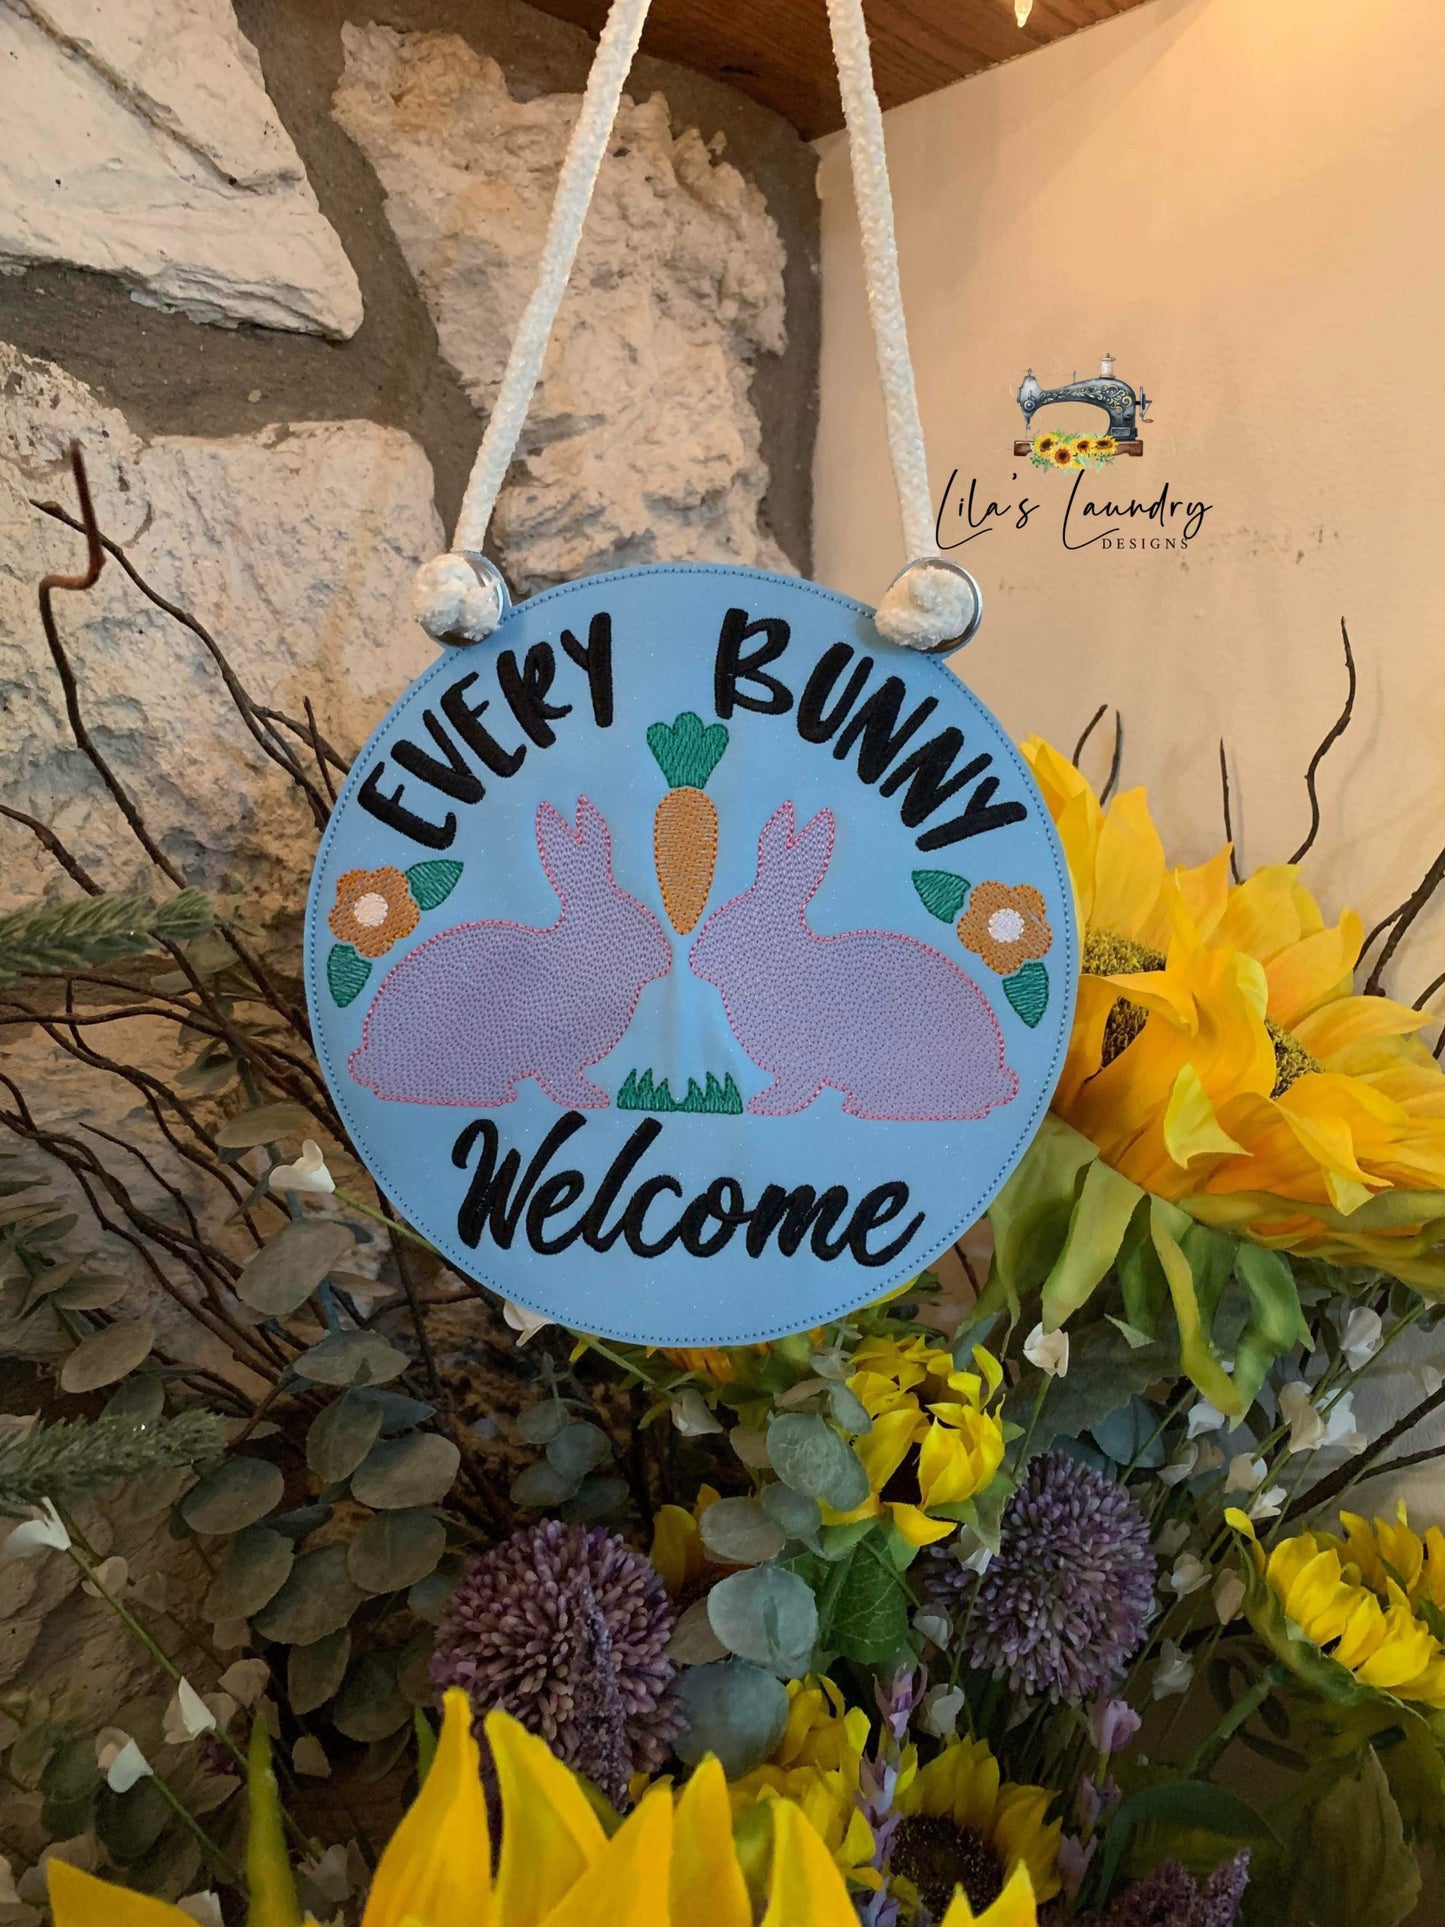 Every Bunny Welcome Door Sign - 3 sizes - Digital Embroidery Design